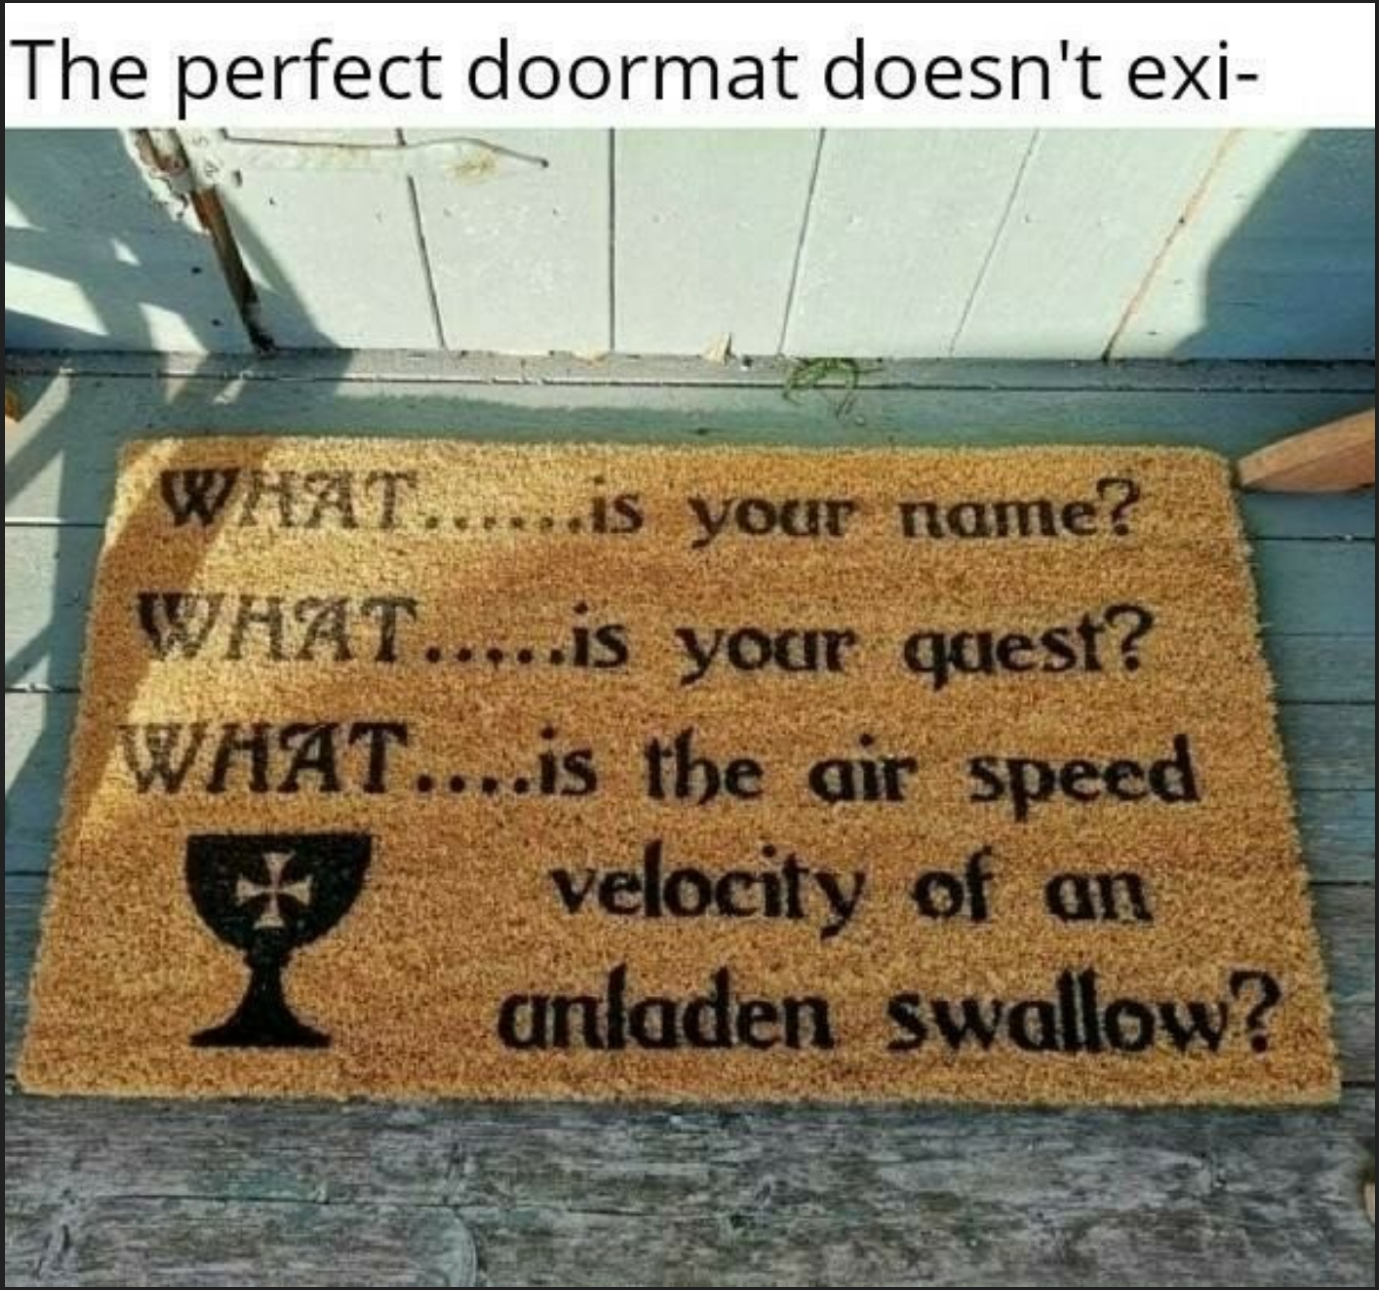 doormat unladen swallow - The perfect doormat doesn't exi What......is your name? What.....is your quest? What....is the air speed velocity of an anladen swallow?